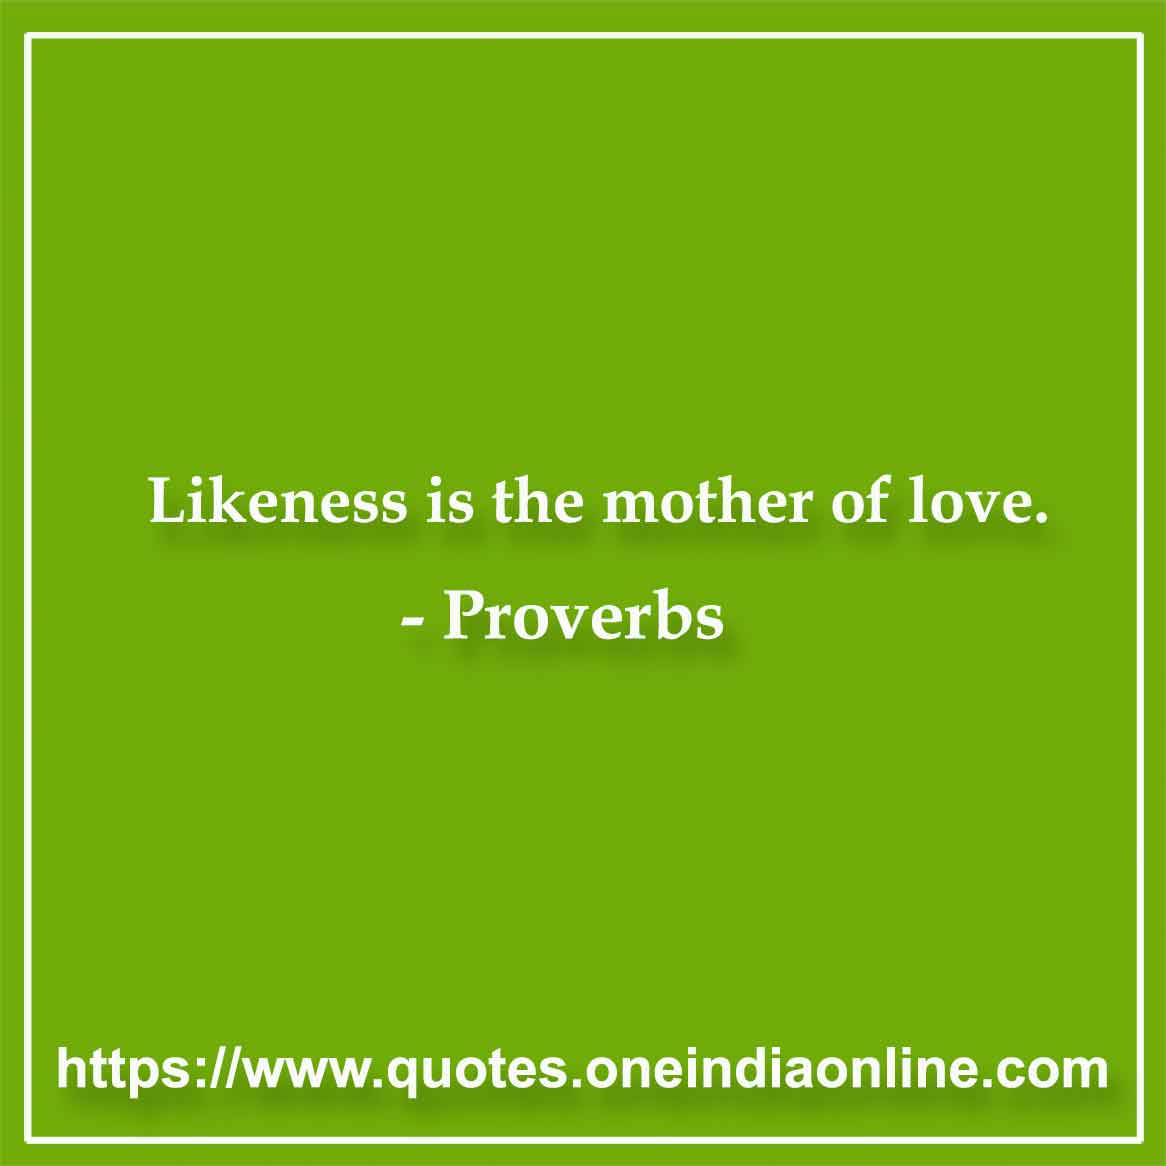 Likeness is the mother of love.

French  in English